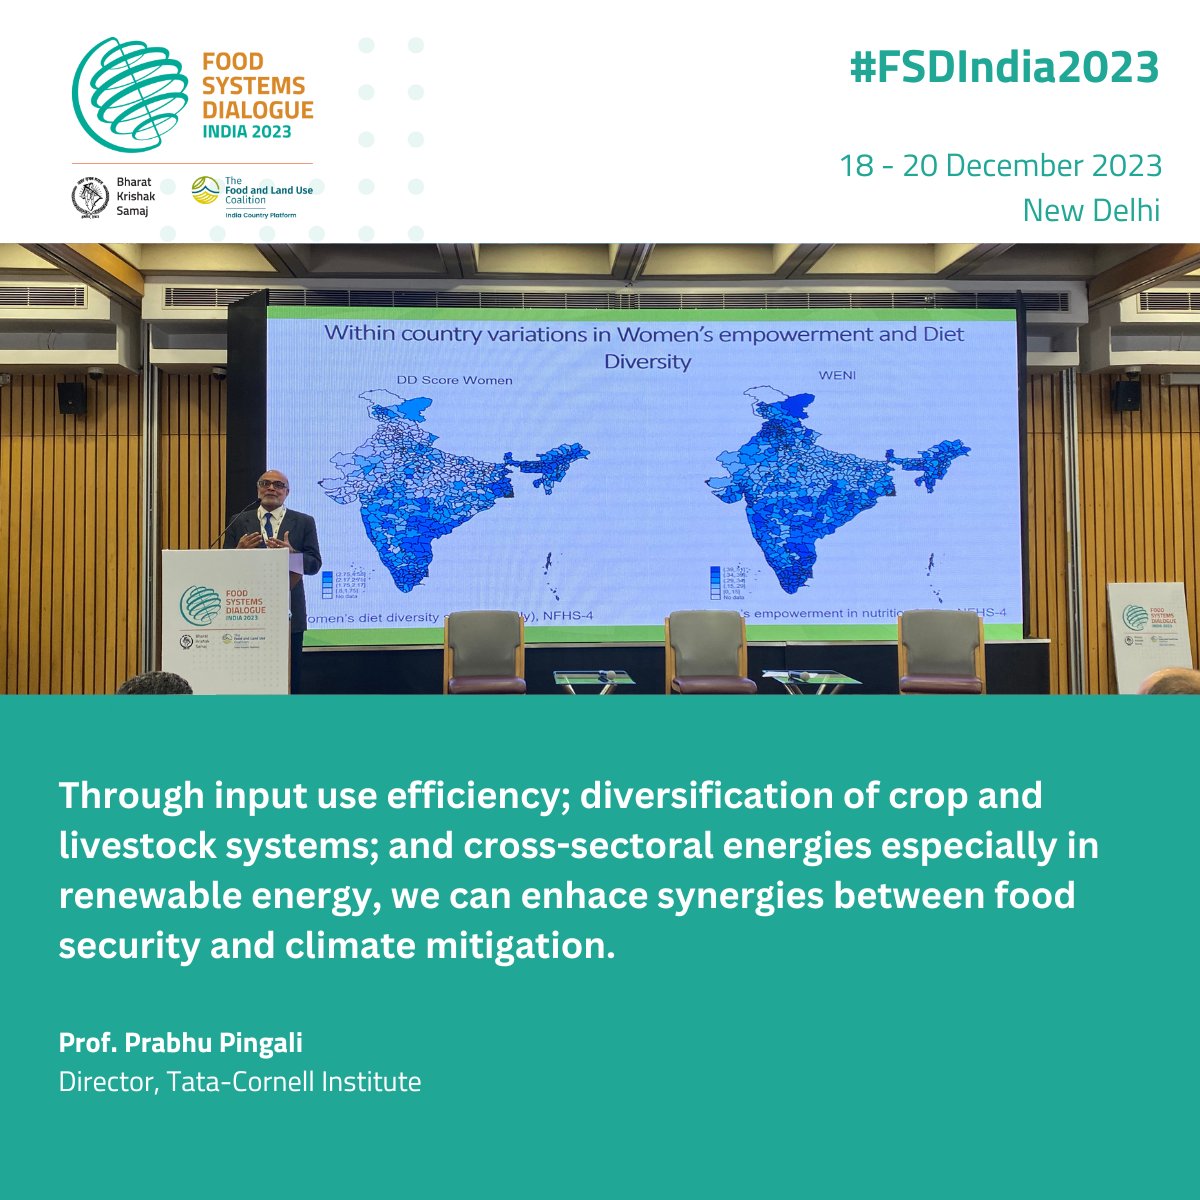 Prof @prabhupingali @TataCornell speaks at #FSDIndia2023 inaugural session: I’m sure one can achieve the food security and climate resilient agriculture system together.